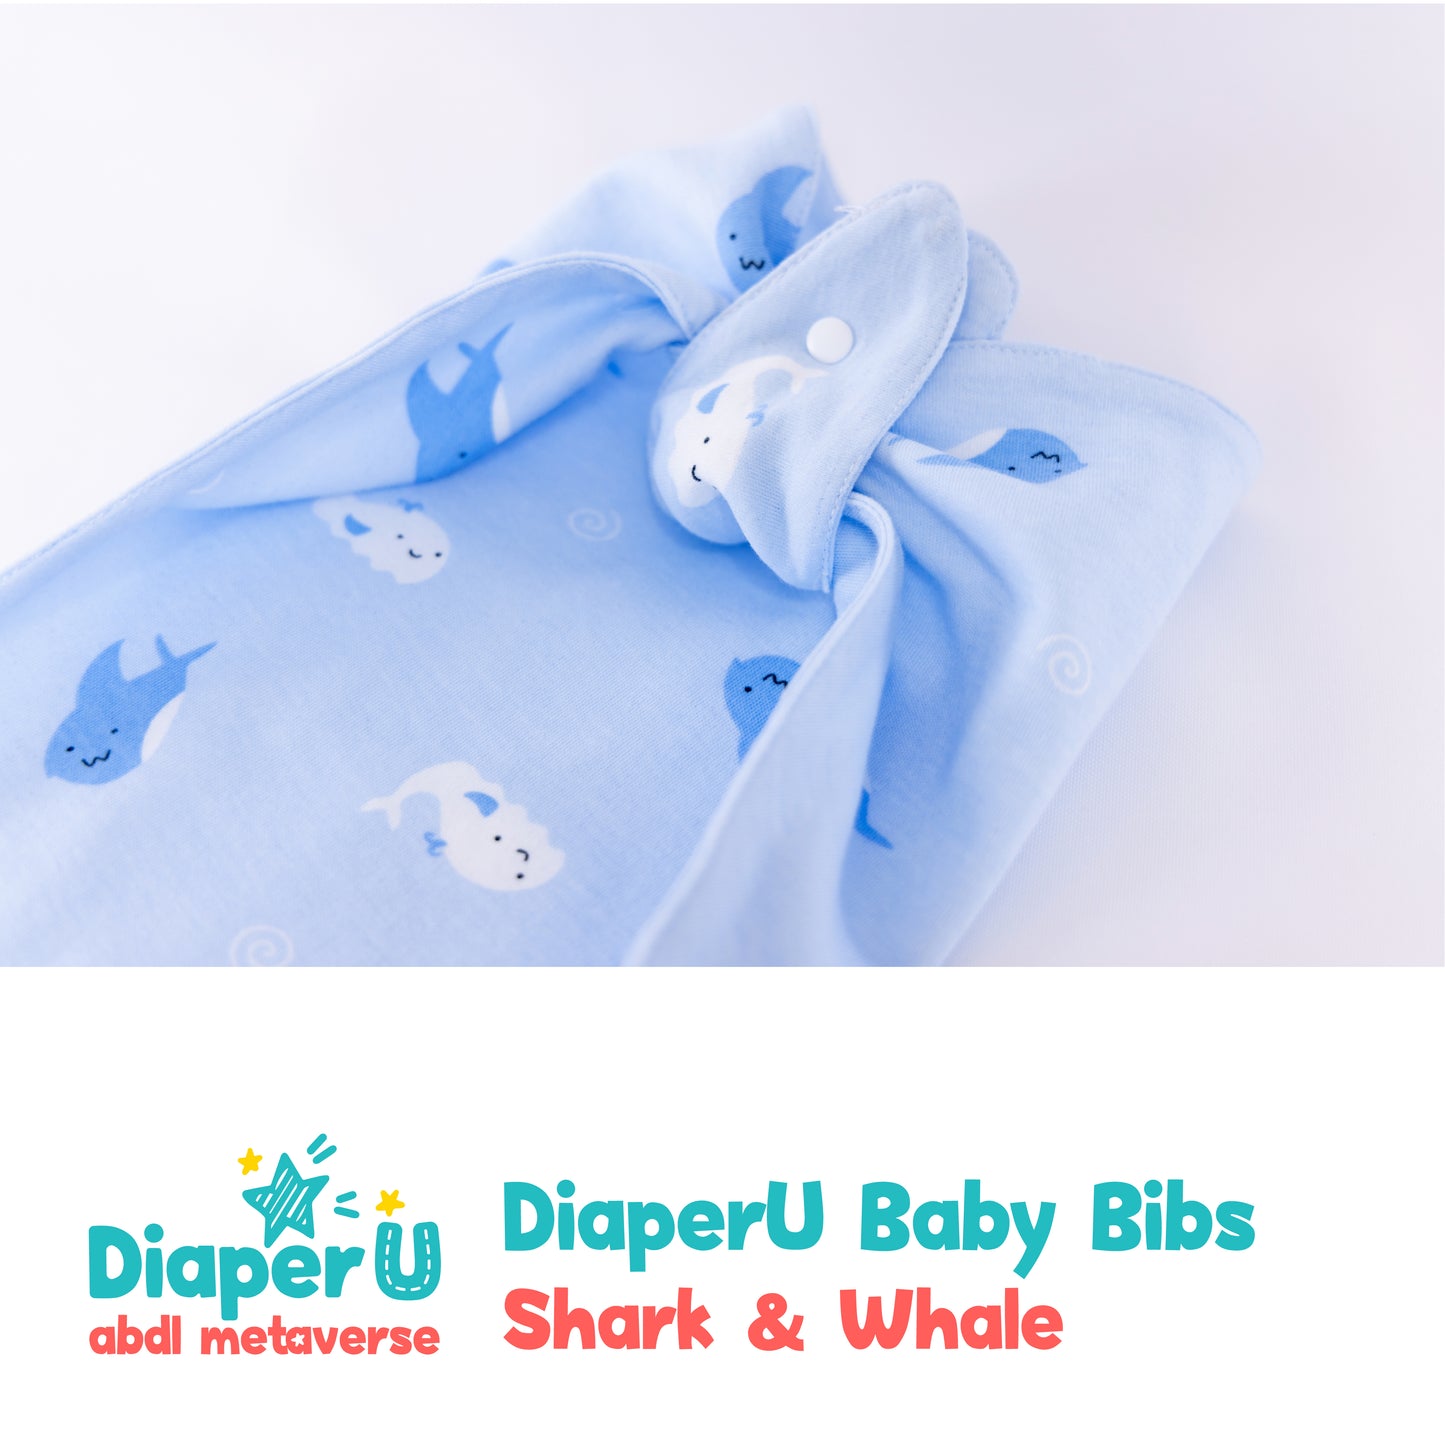 ABDL Baby Bibs - Shark & Whale (Adult Size)